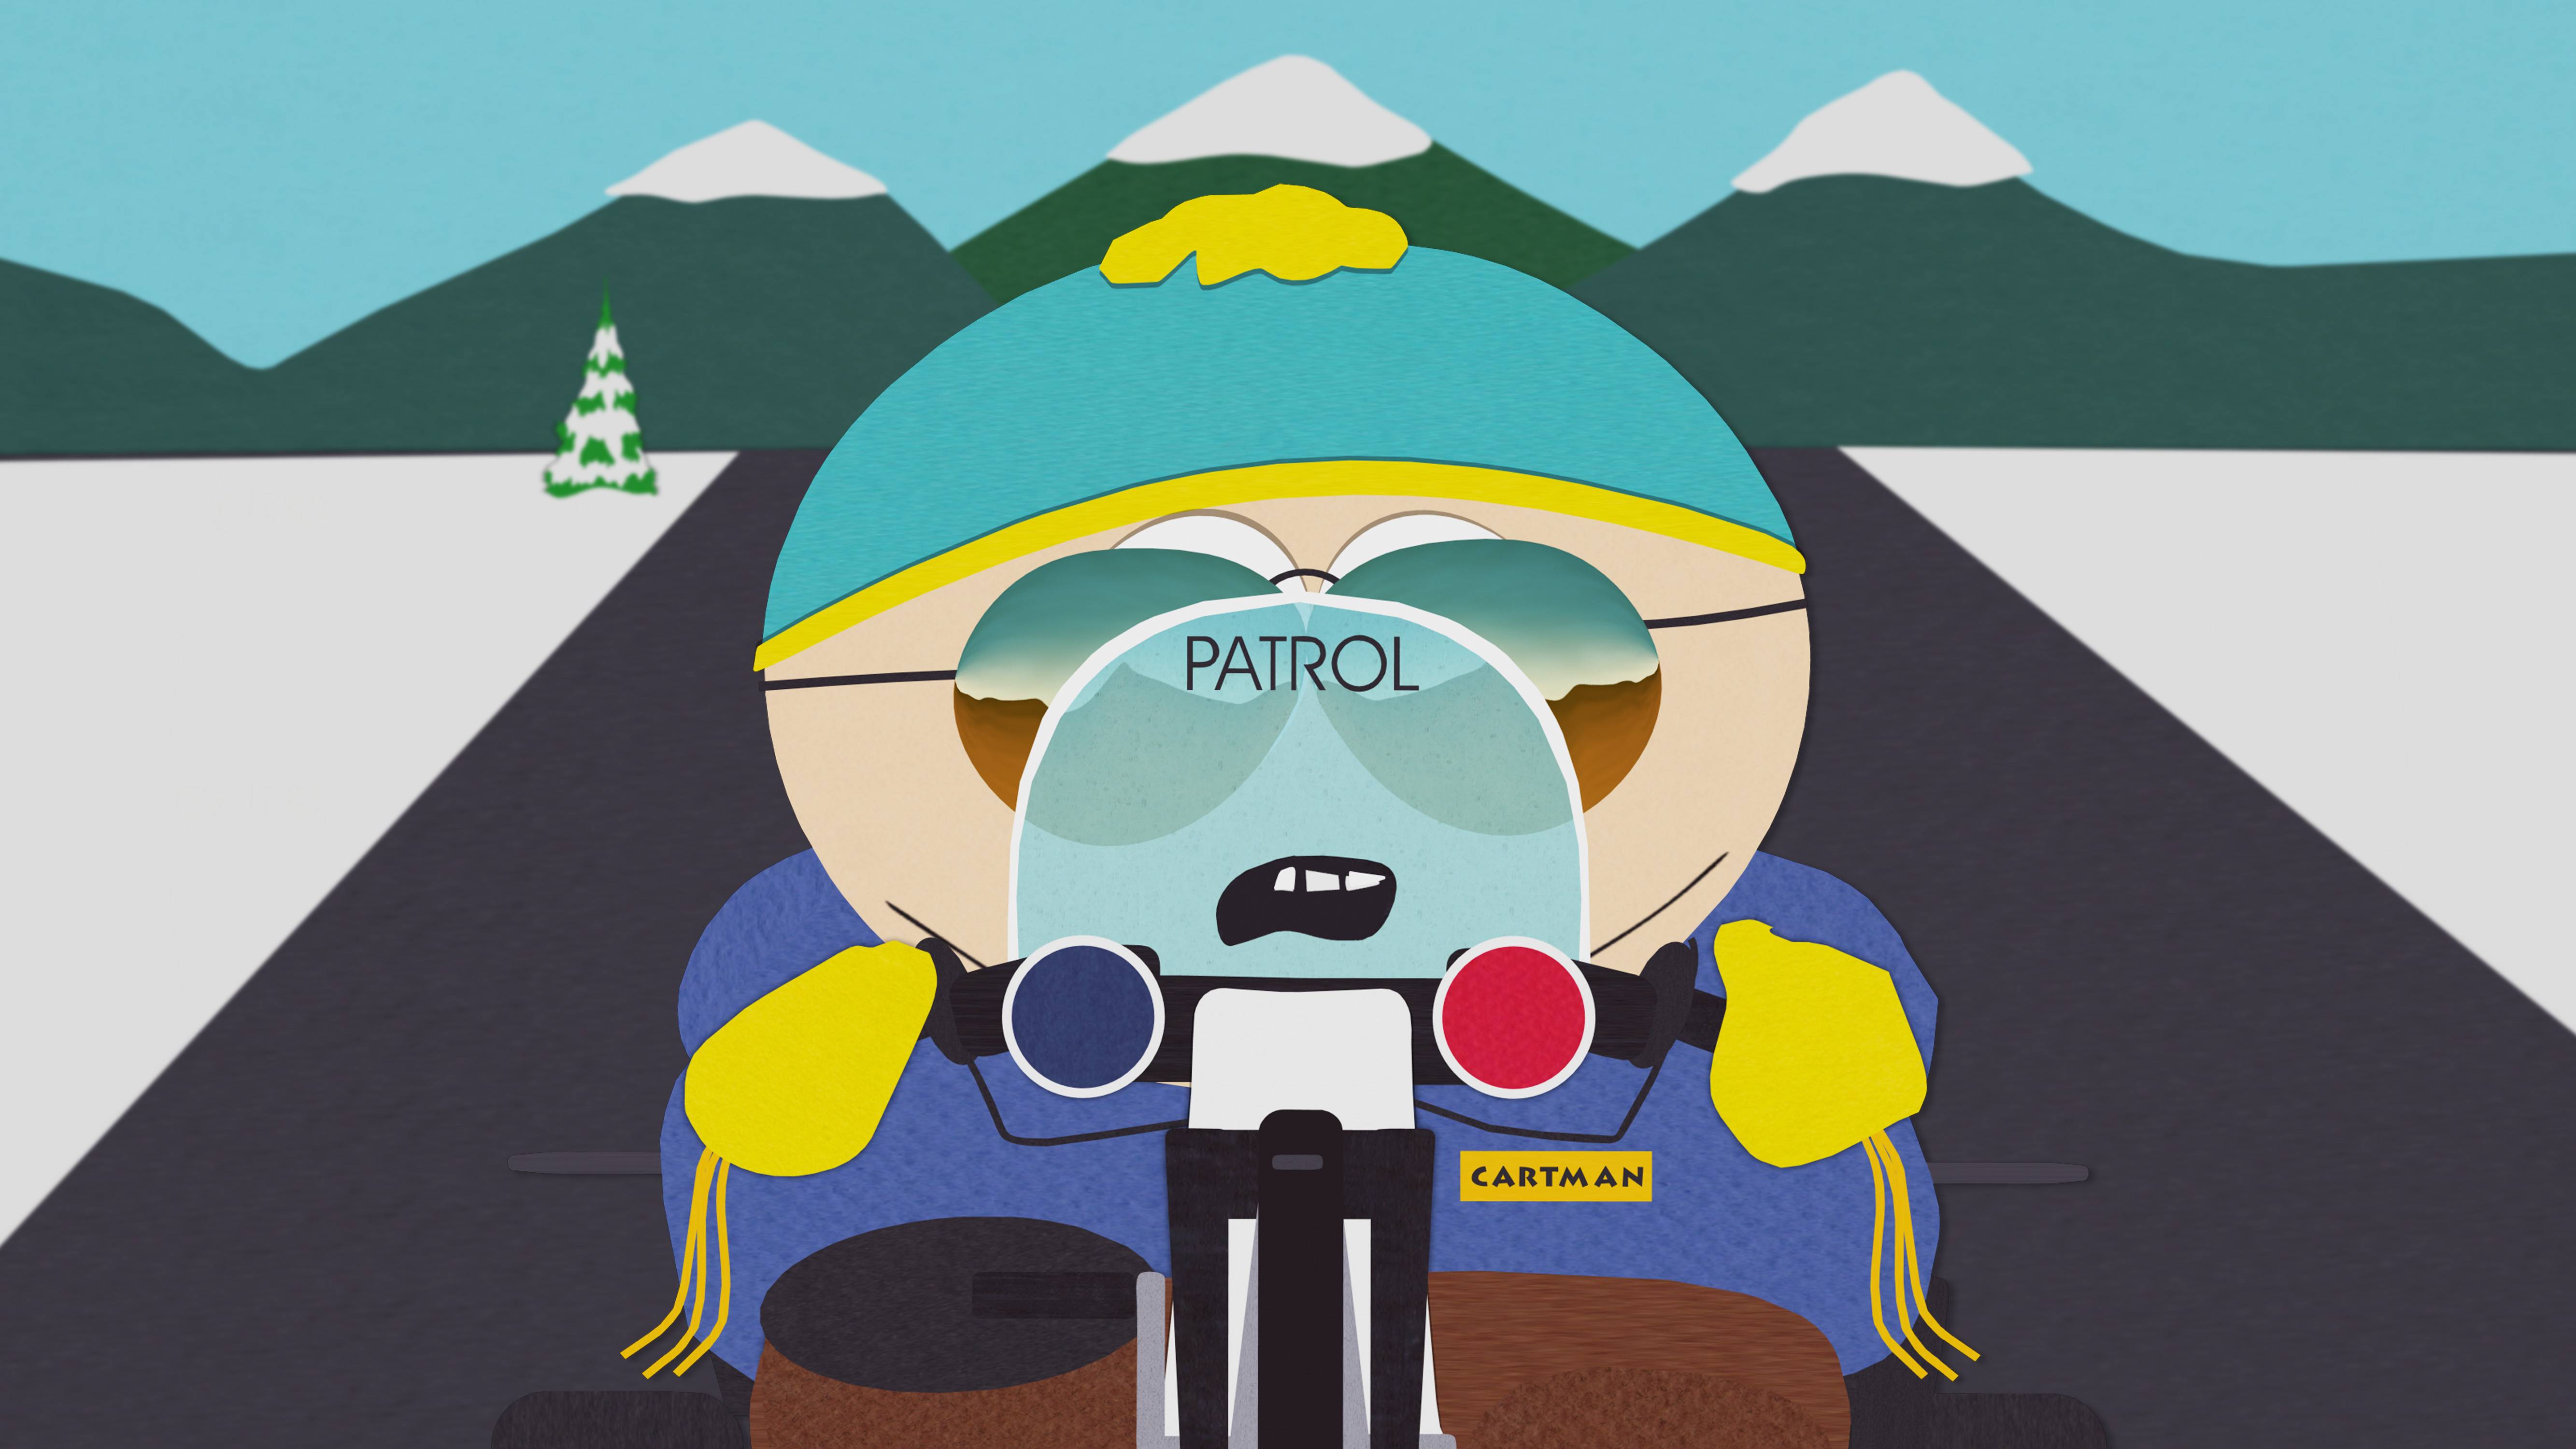 South Park': 21 'They Did WHAT?!' Episodes